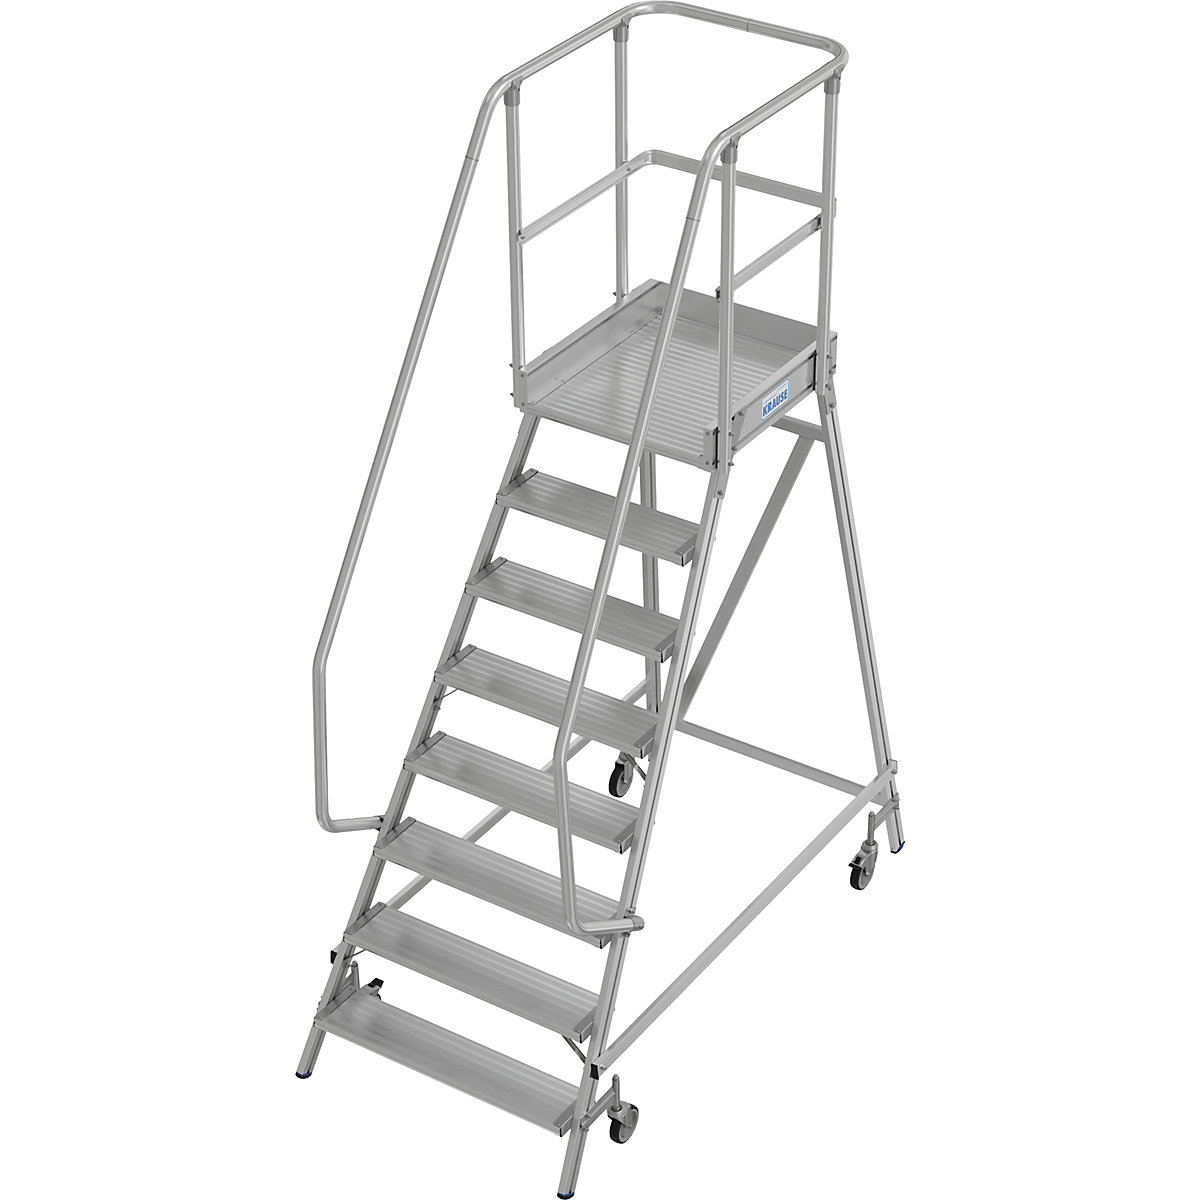 Mobile safety steps – KRAUSE, single sided access, 8 steps-10